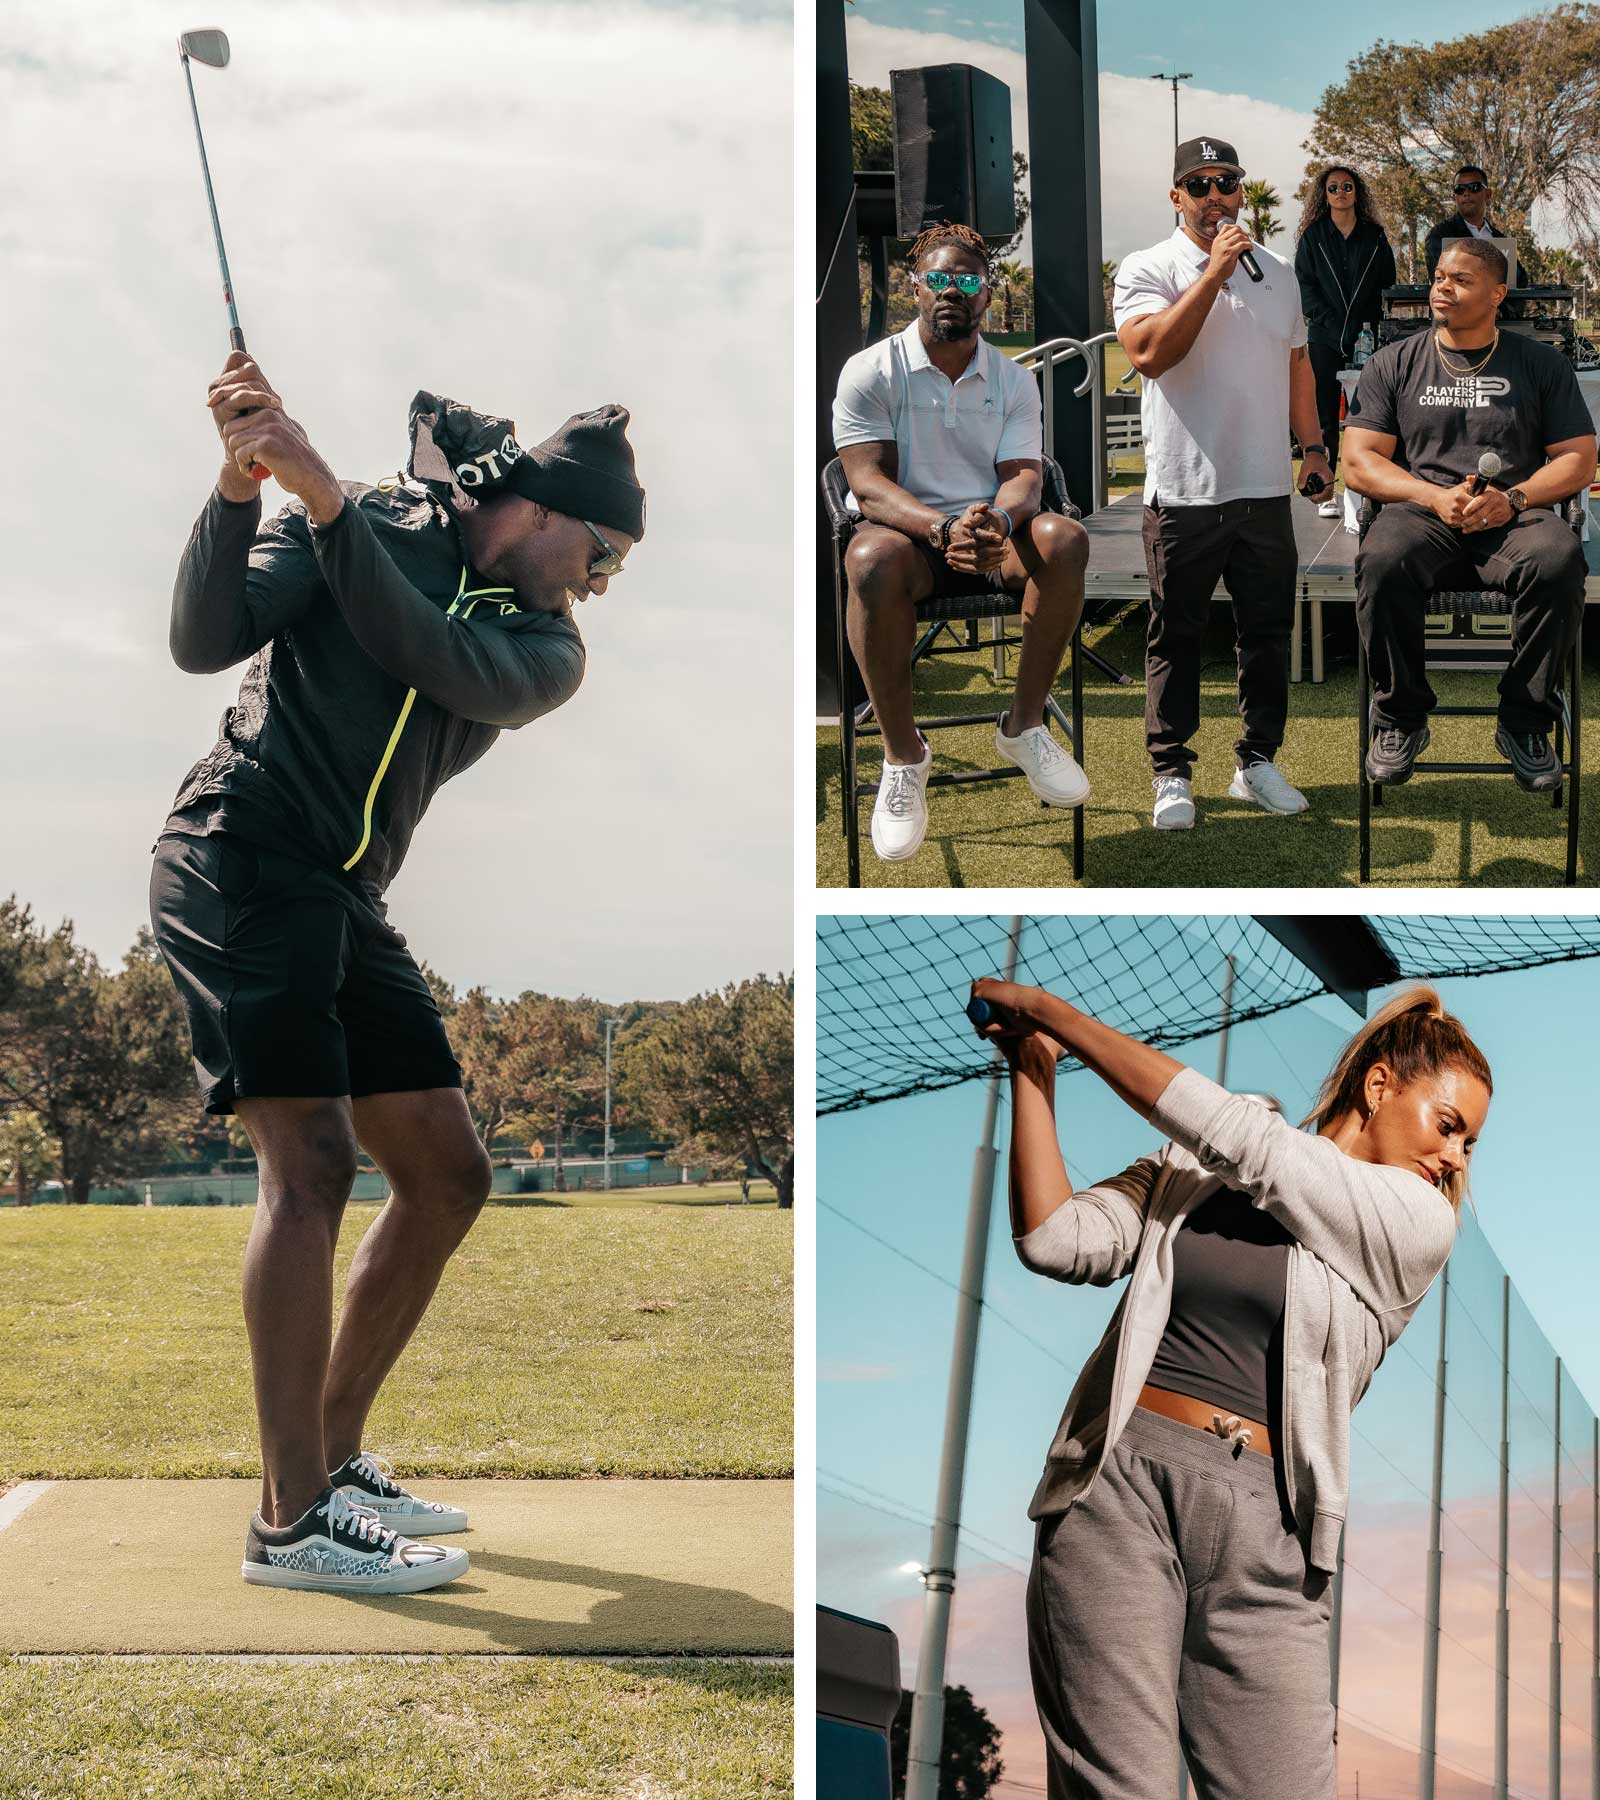 Athletes And Entertainers Unite For Golf And Diversity At Change The Game -Terrell Owens